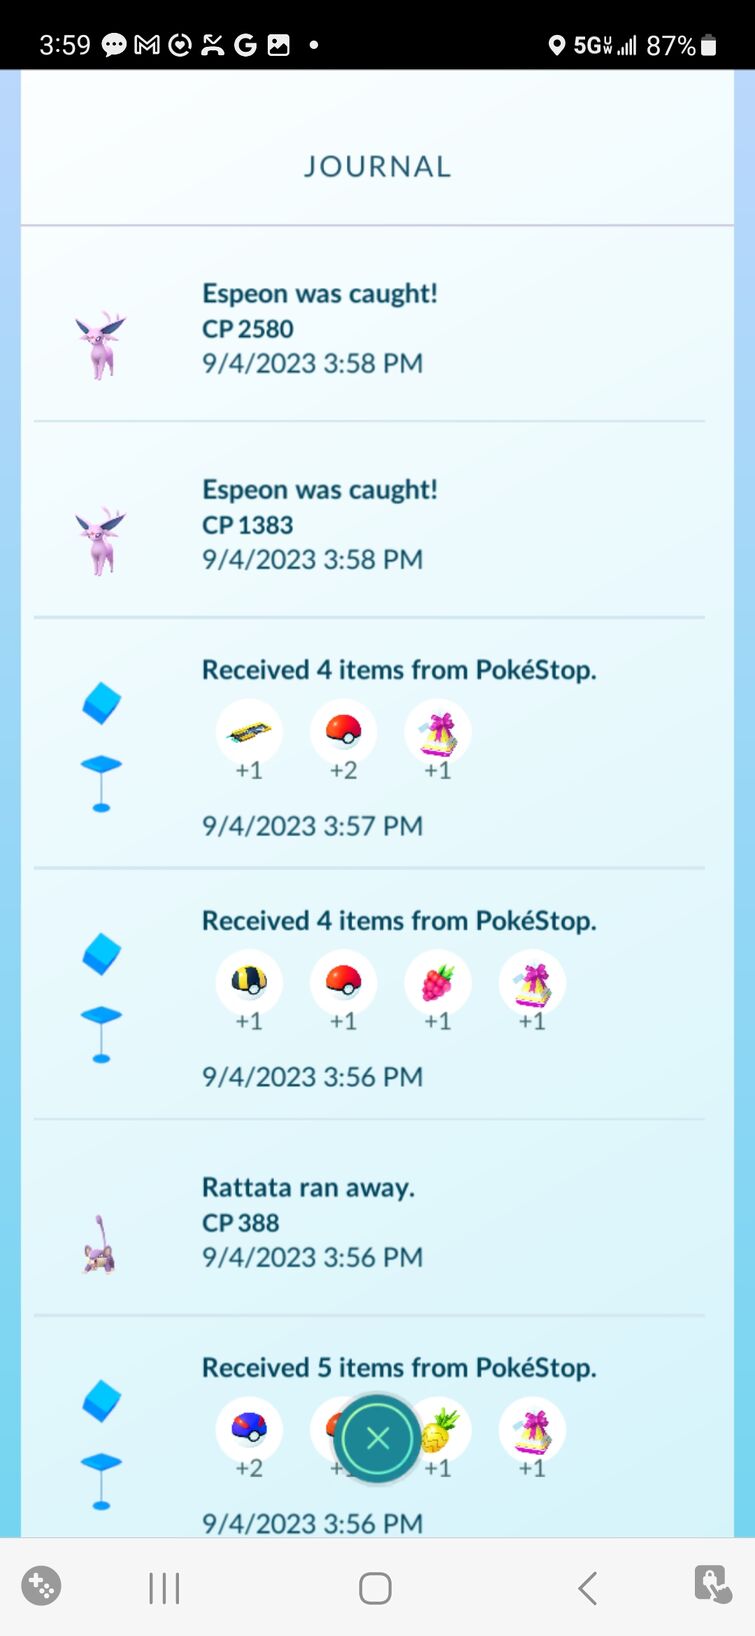 Pokemon GO Let's GO Collection Challenge and Field Research: All tasks and  rewards